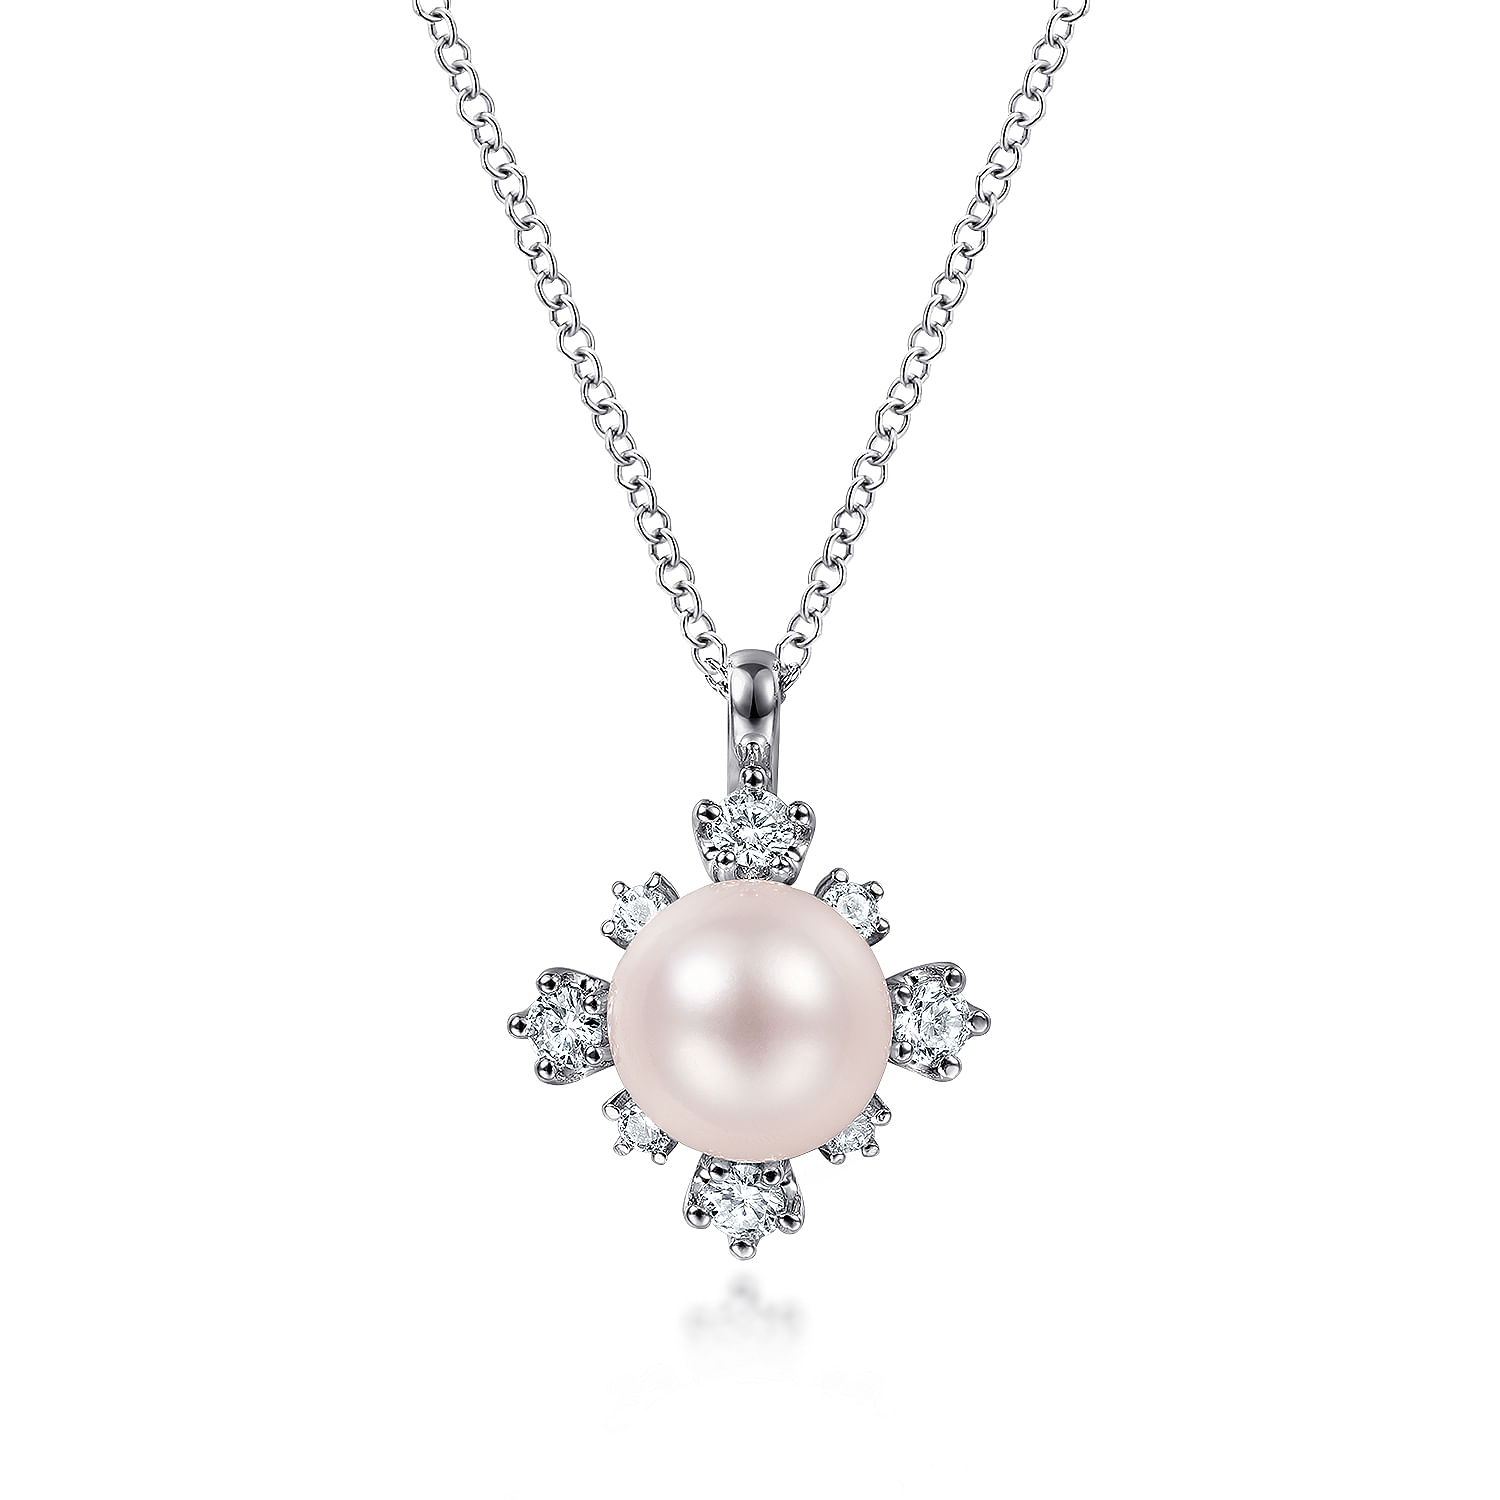 14K White Gold Round Pearl Pendant Necklace with Diamond Accents